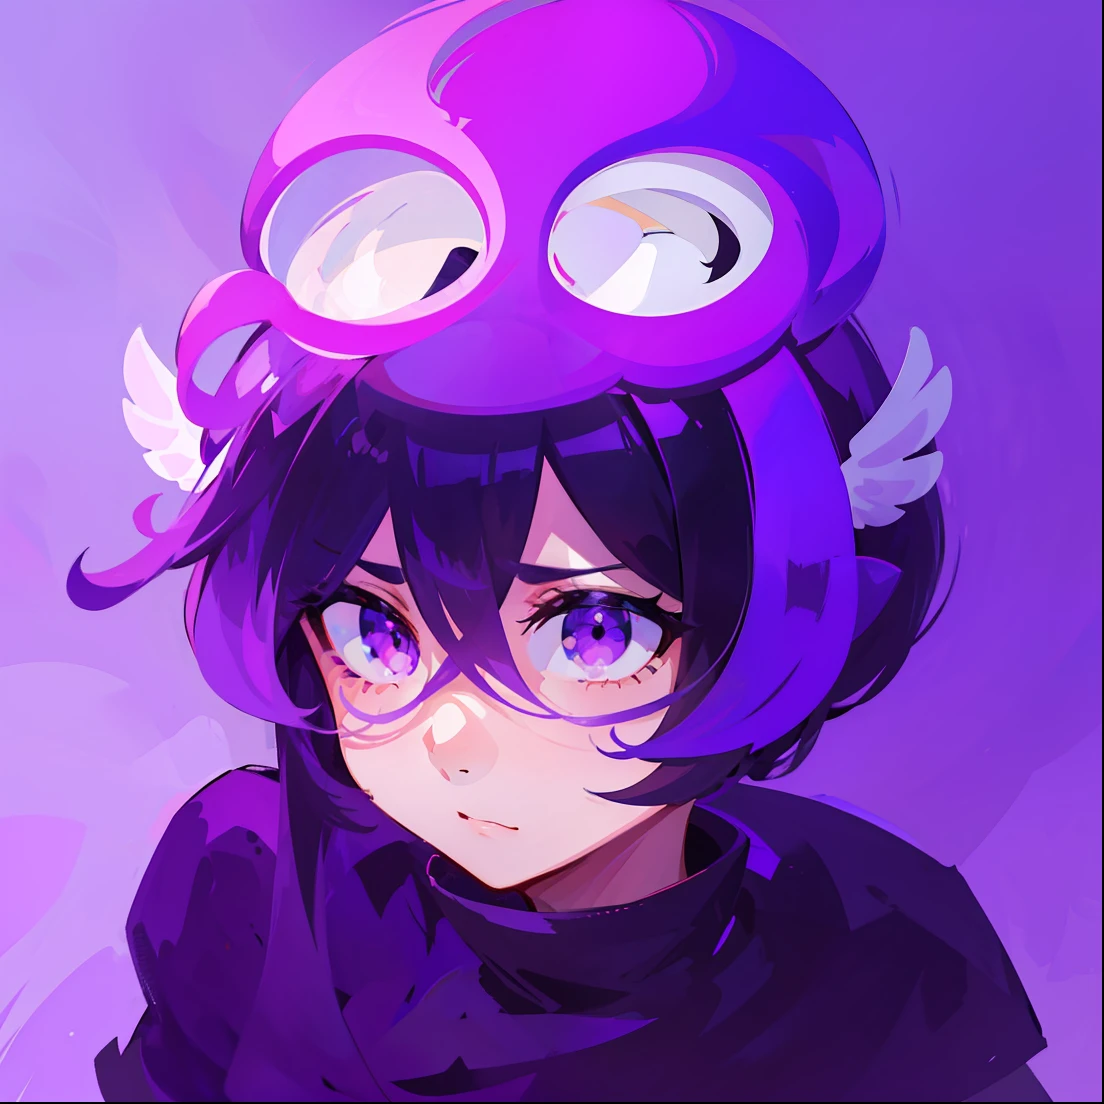 menino,face shy,grandes copos redondos,gradiente,fundo gradiente,fundo roxo,mid hair,cabelo entre os olhos,small white wings on both heads,olhando para o espectador,Beautiful purple squid on head with tentacles complementing her hair,roxo olhos grandes,